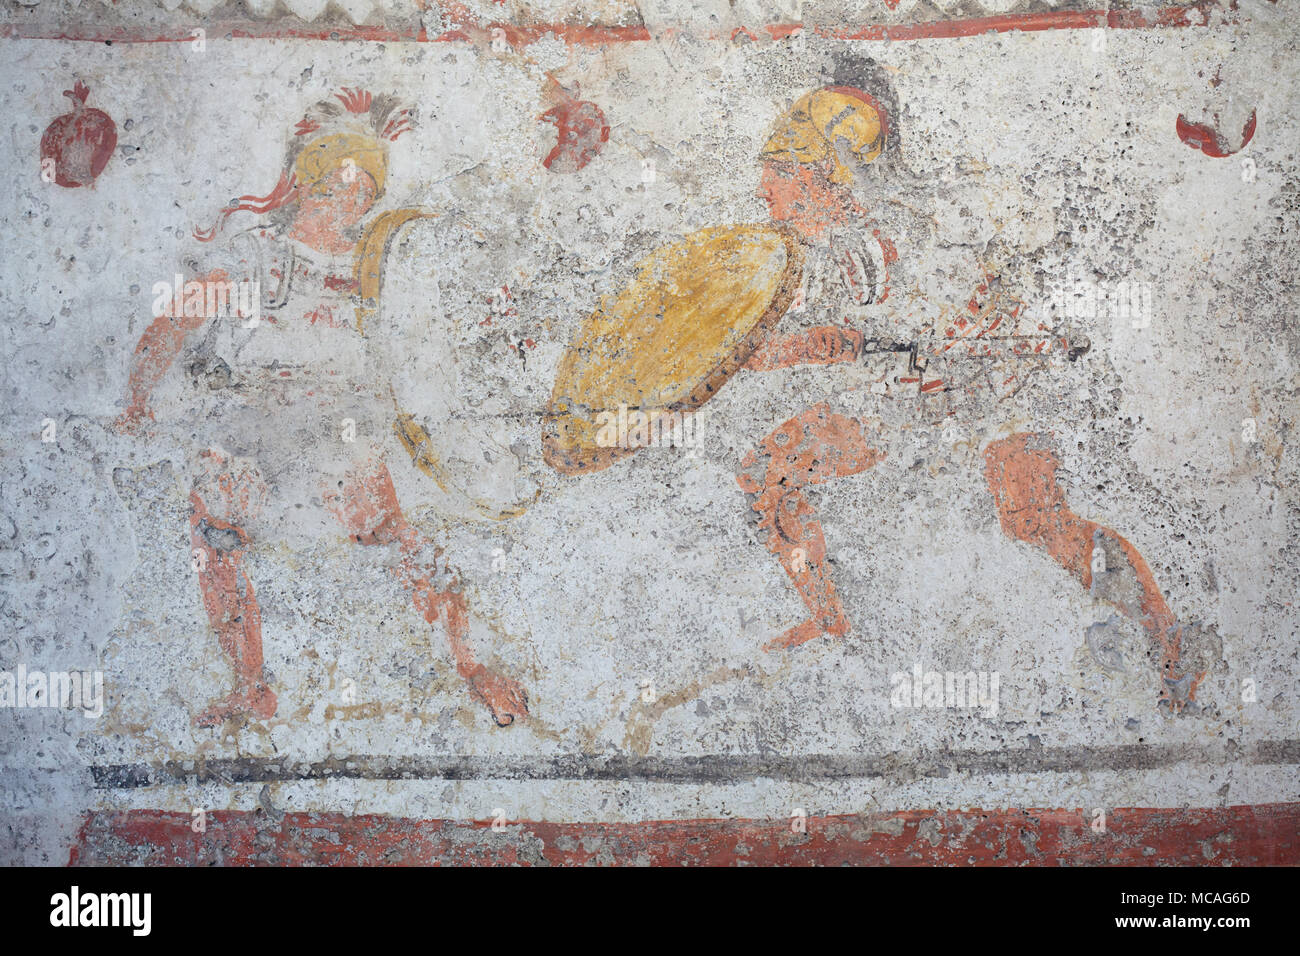 Duel of warriors depicted in the Lucanian fresco dated from the last decades of the 4th century BC from the Tomb 4 of the Andriuolo Necropolis on display in the Paestum Archaeological Museum (Museo archeologico di Paestum) in Paestum, Campania, Italy. Stock Photo